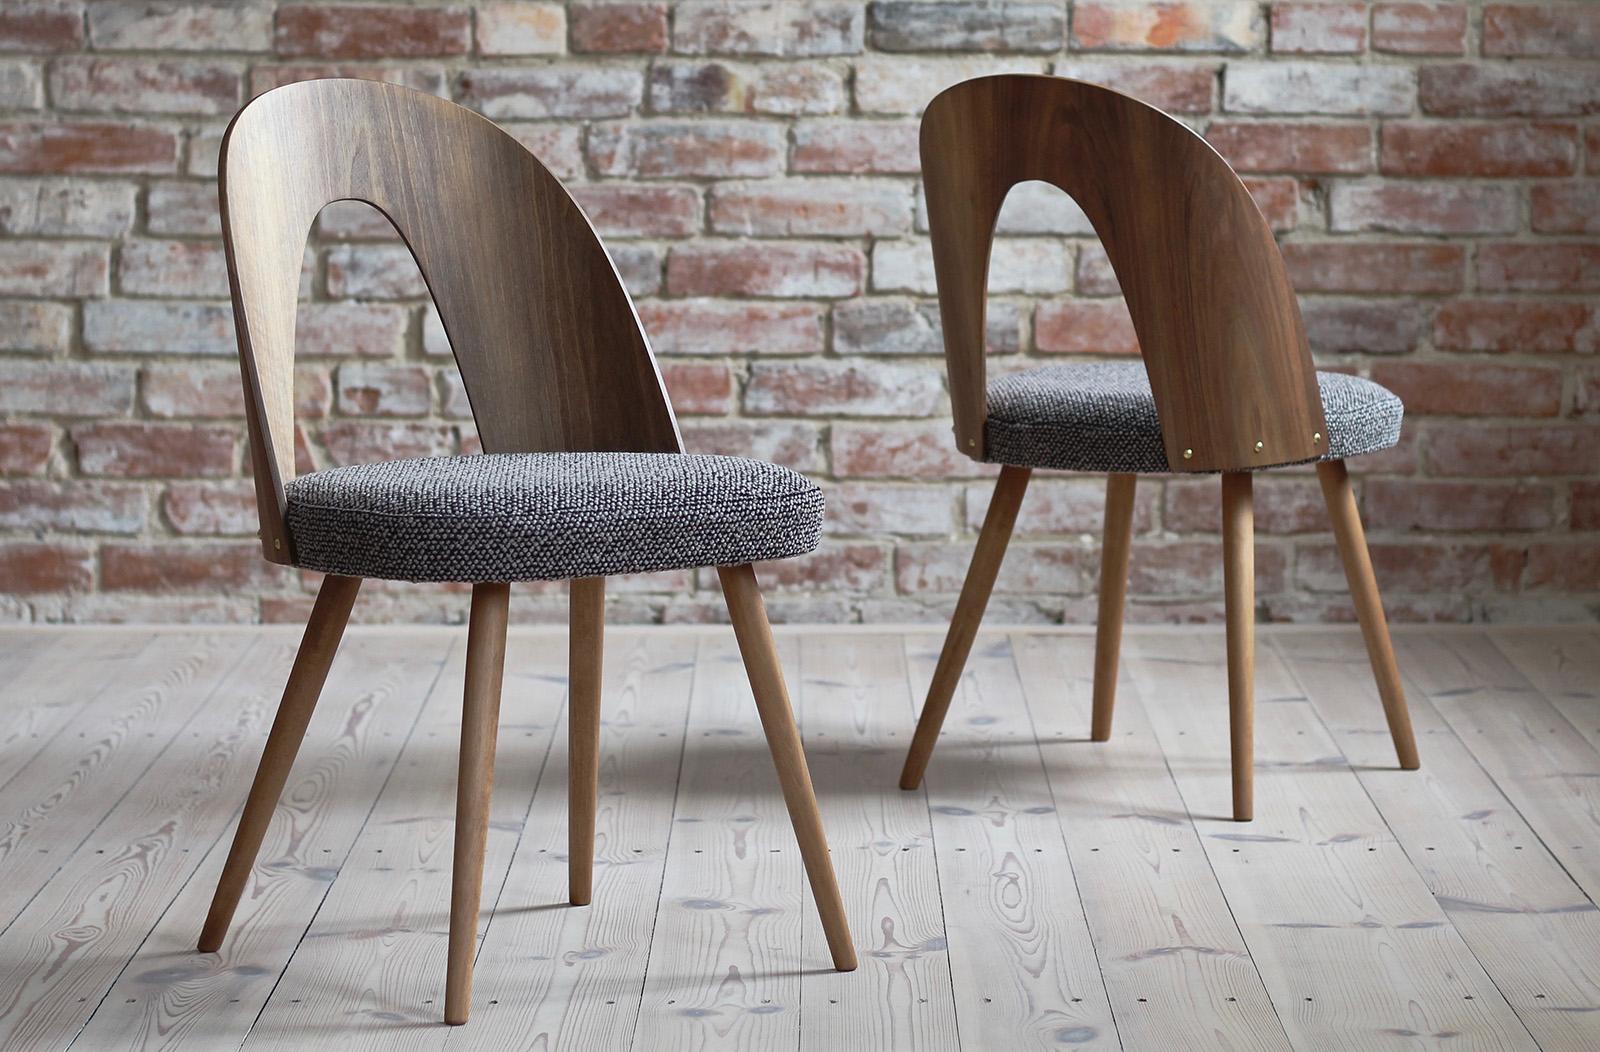 Czech Set of 4 Midcentury Dining Chairs by A. Šuman, Reupholstered in Kvadrat Fabric